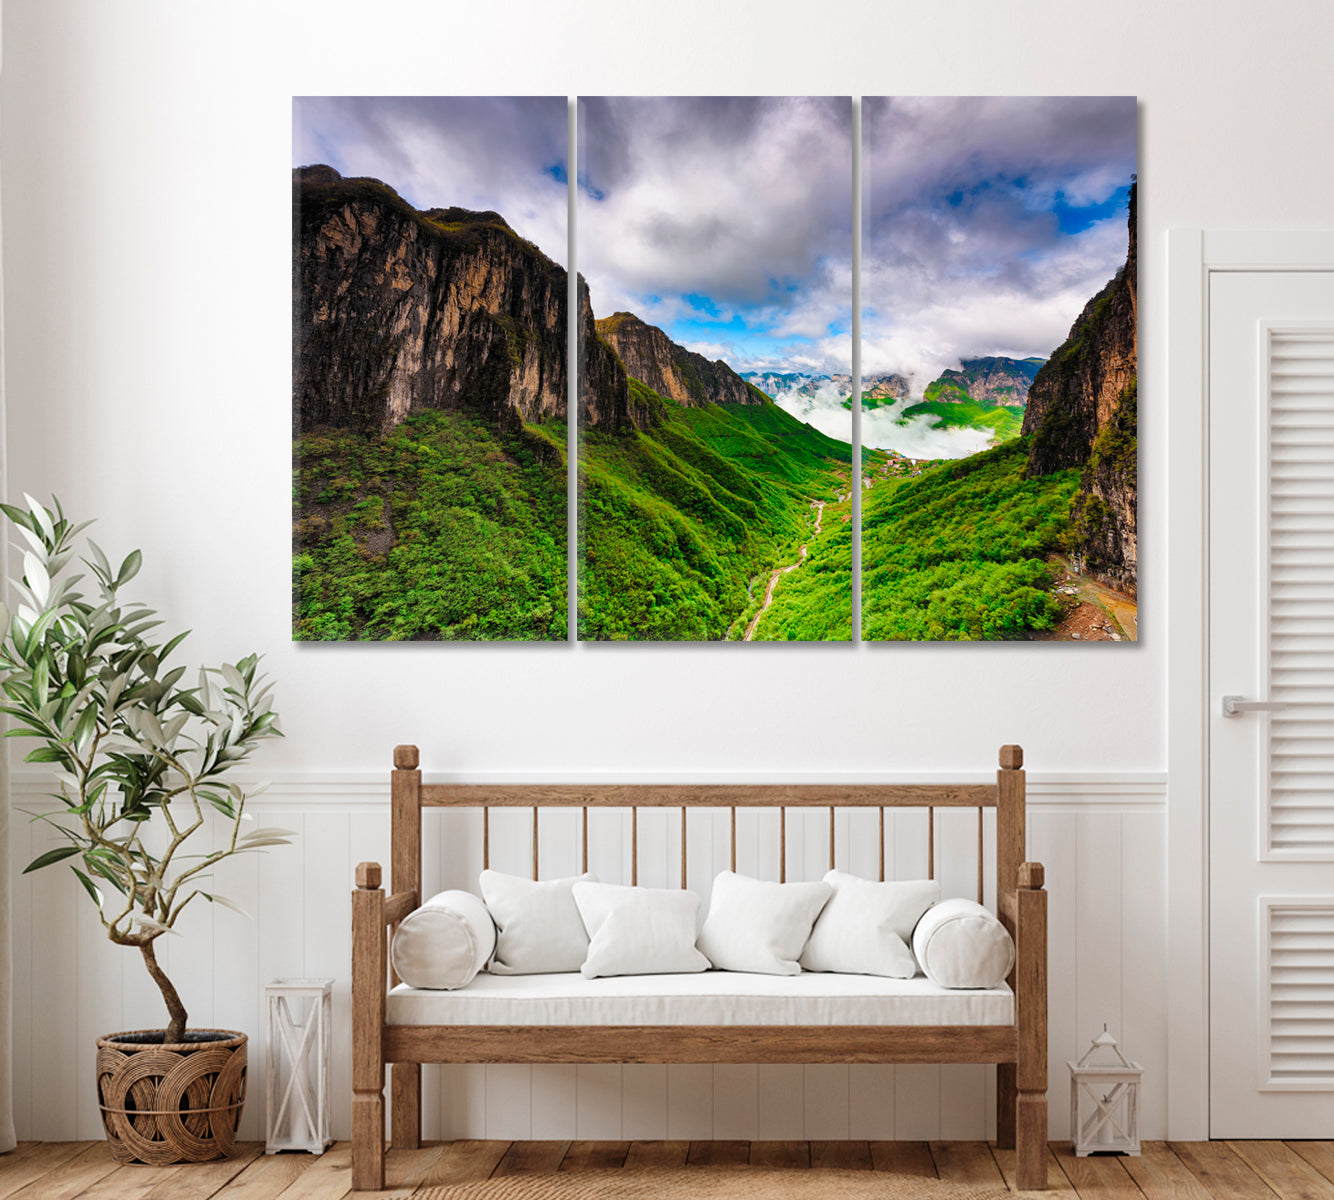 Stunning Mountain Landscape China Canvas Print ArtLexy 3 Panels 36"x24" inches 